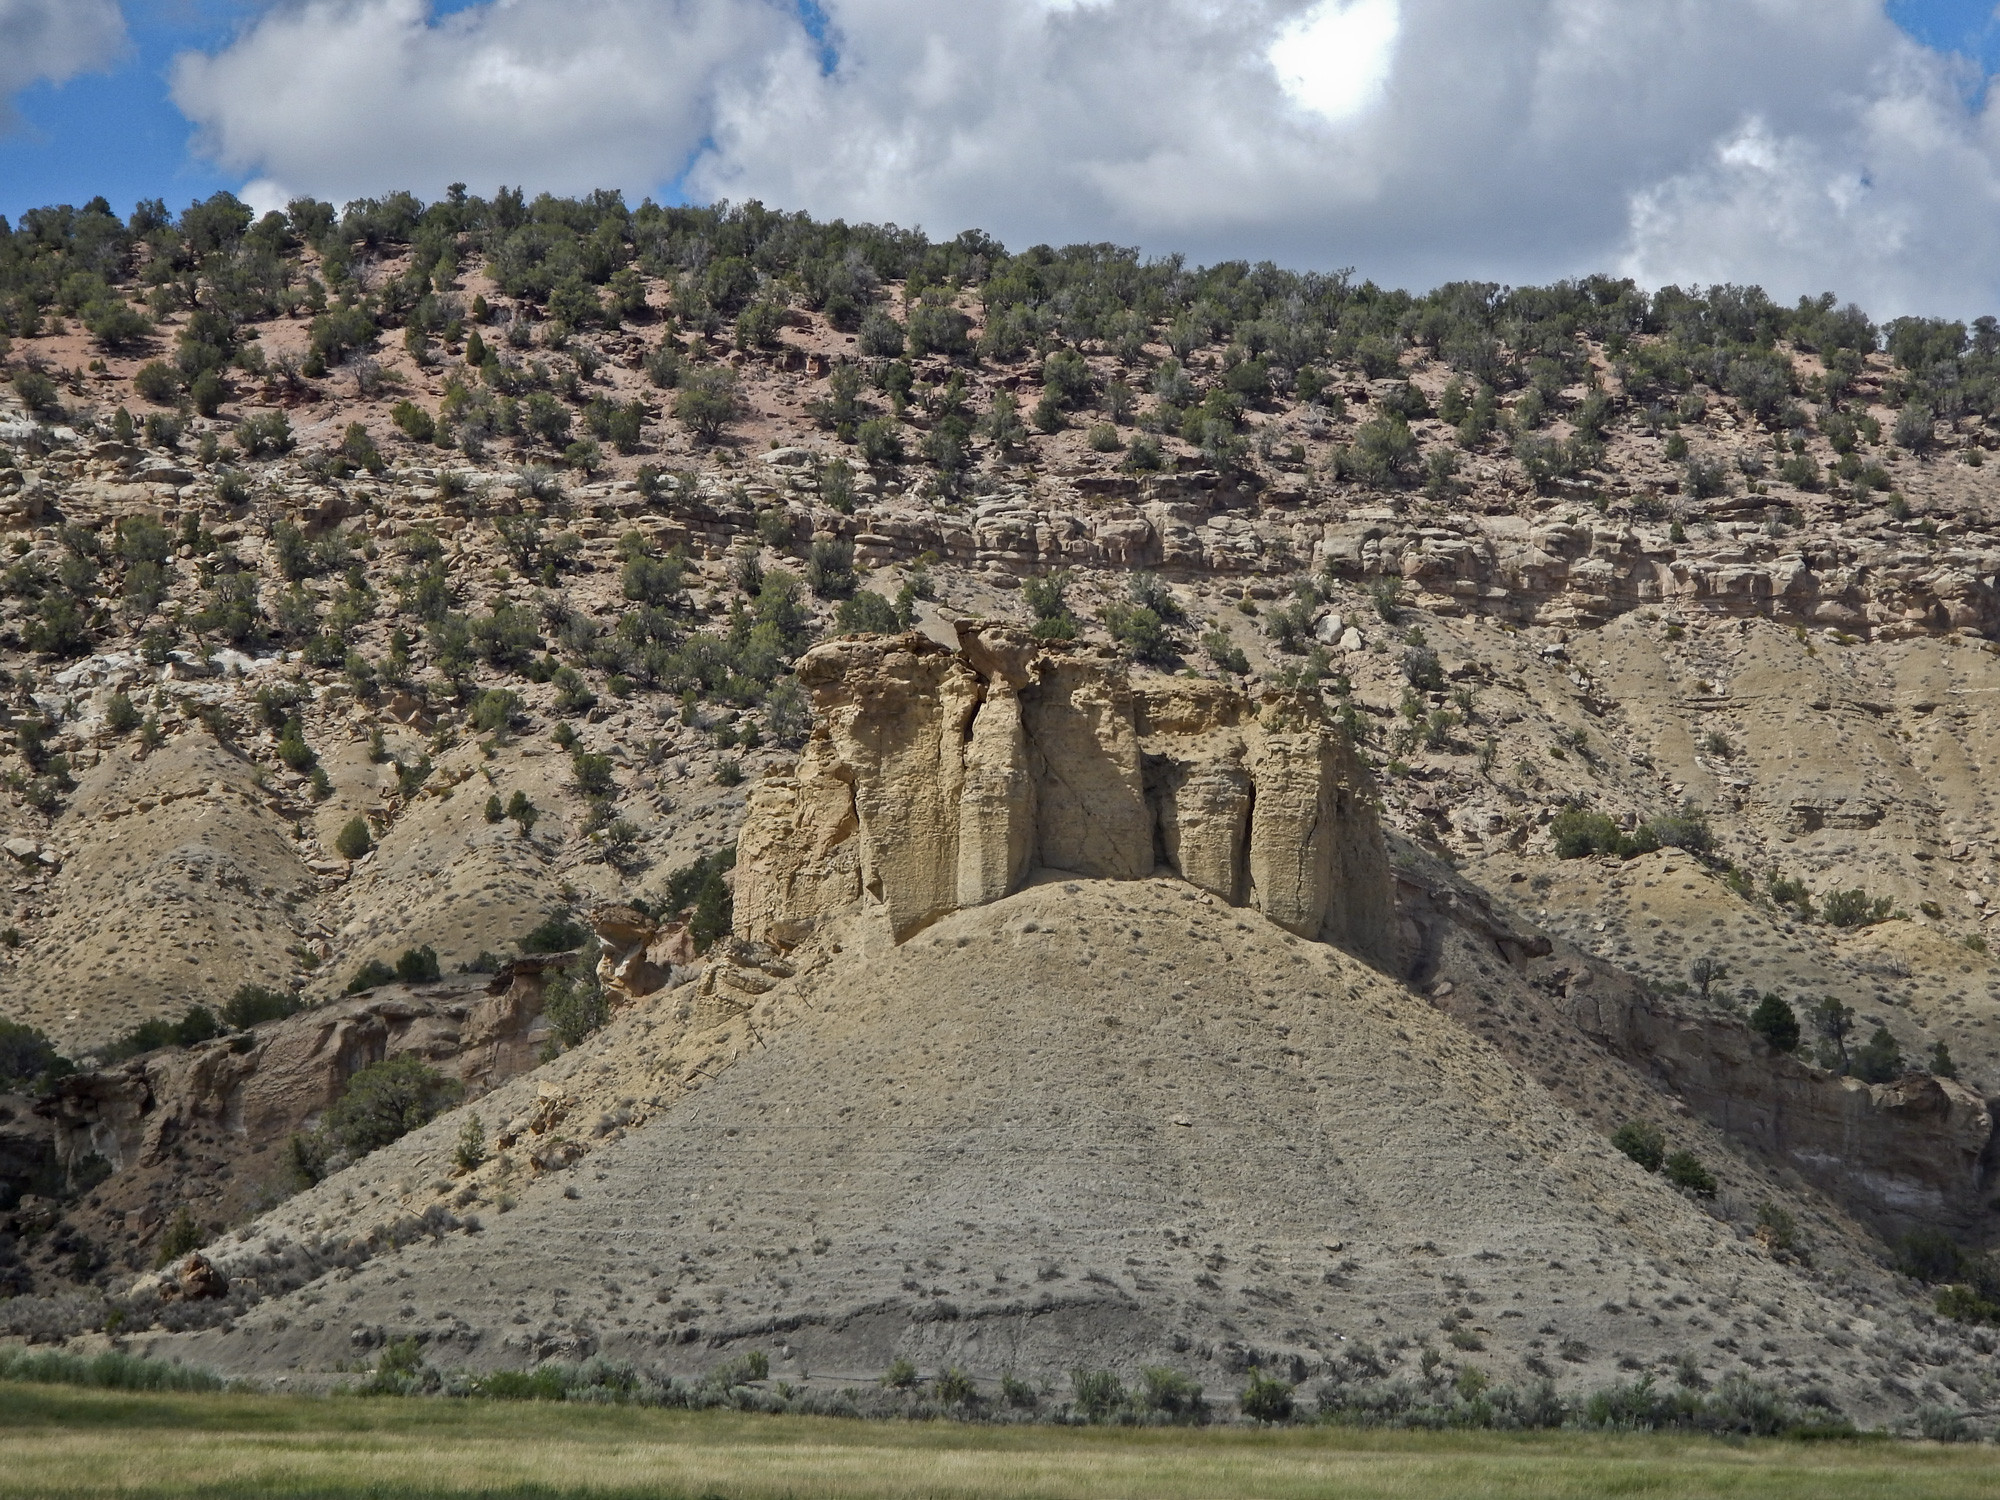 A cuesta along Dirty George Creek capped by Cozzette Sandstone that interfingers the Mancos Shale. The thick whitish colored sandstone in center background above the Mancos is the Rollins Sandstone of the Iles Formation. The reddish rock above is coal-fire clinker in the Williams Fork Cameo coal zone, south of Hells Kitchen, Delta County, Colorado. Photo credit: Jon White for the CGS.